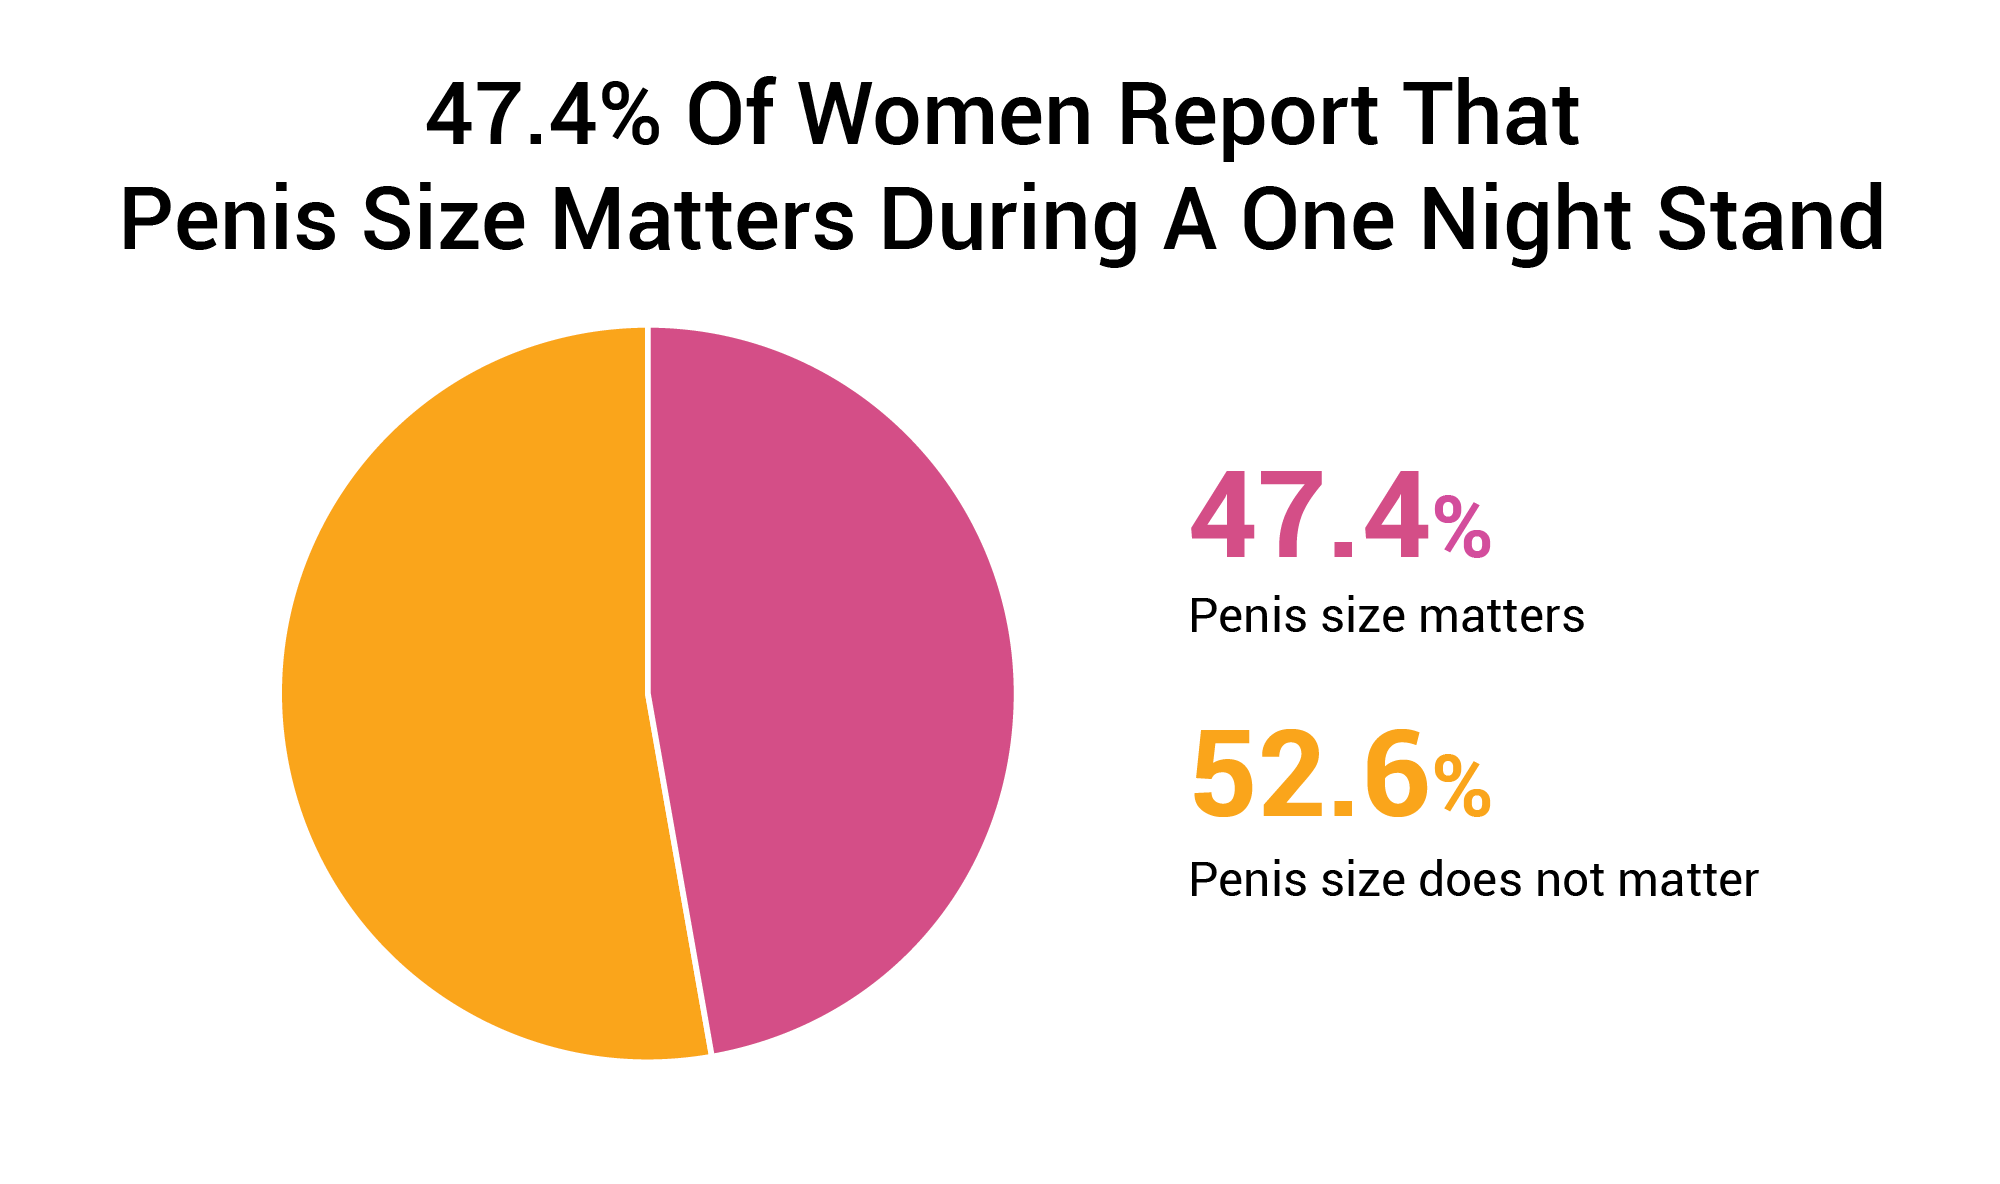 Does Size Matter? 91.7% Of Women Say It Does 1,387 Woman Study pic pic